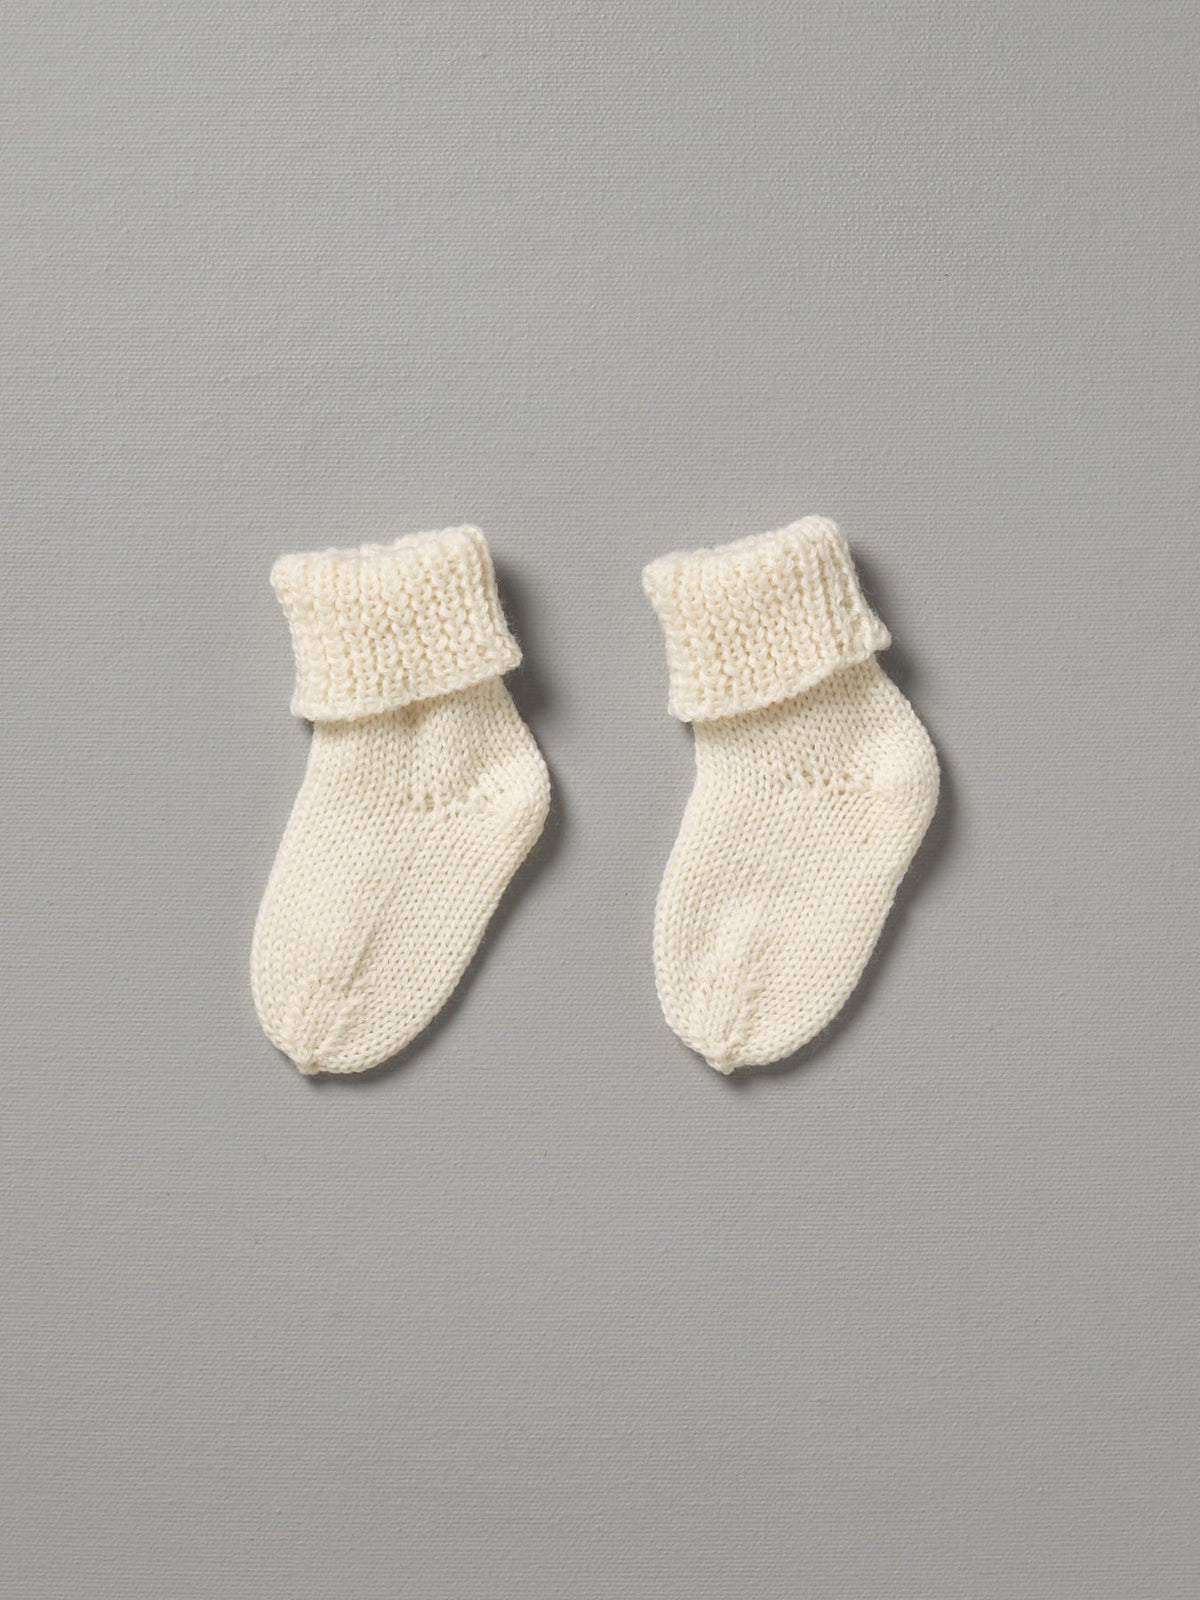 A pair of Weebits Hand Knitted 2ply Merino Socks  - Ivory on a grey background.